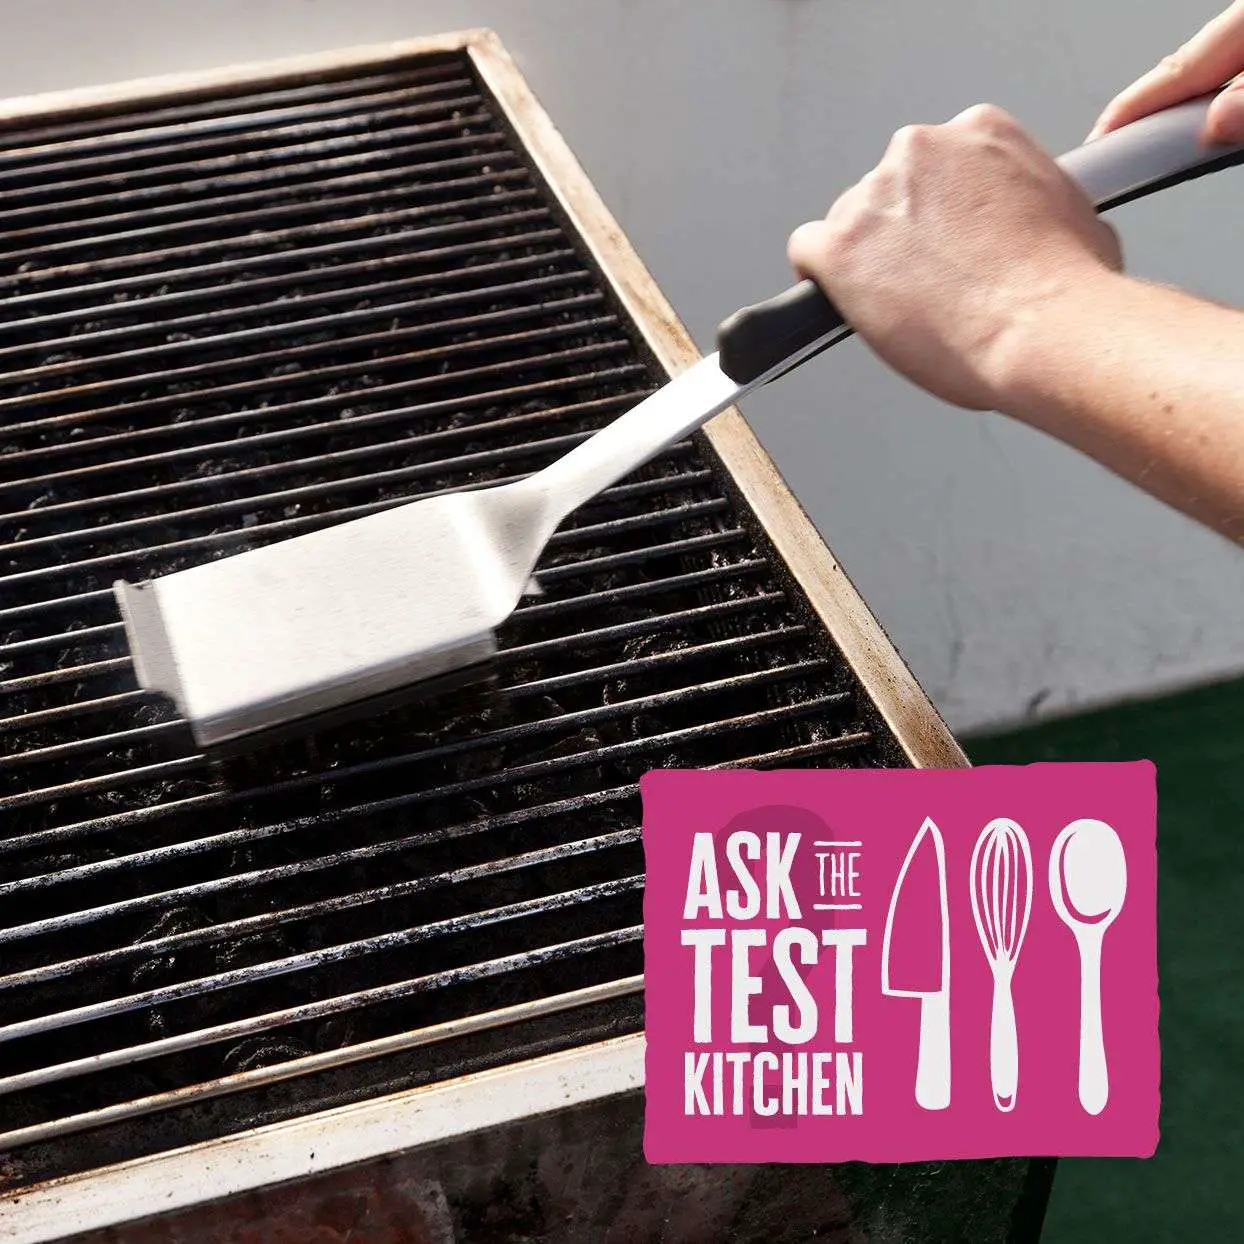 How to Clean a Grill Properly, According to Our Test ...